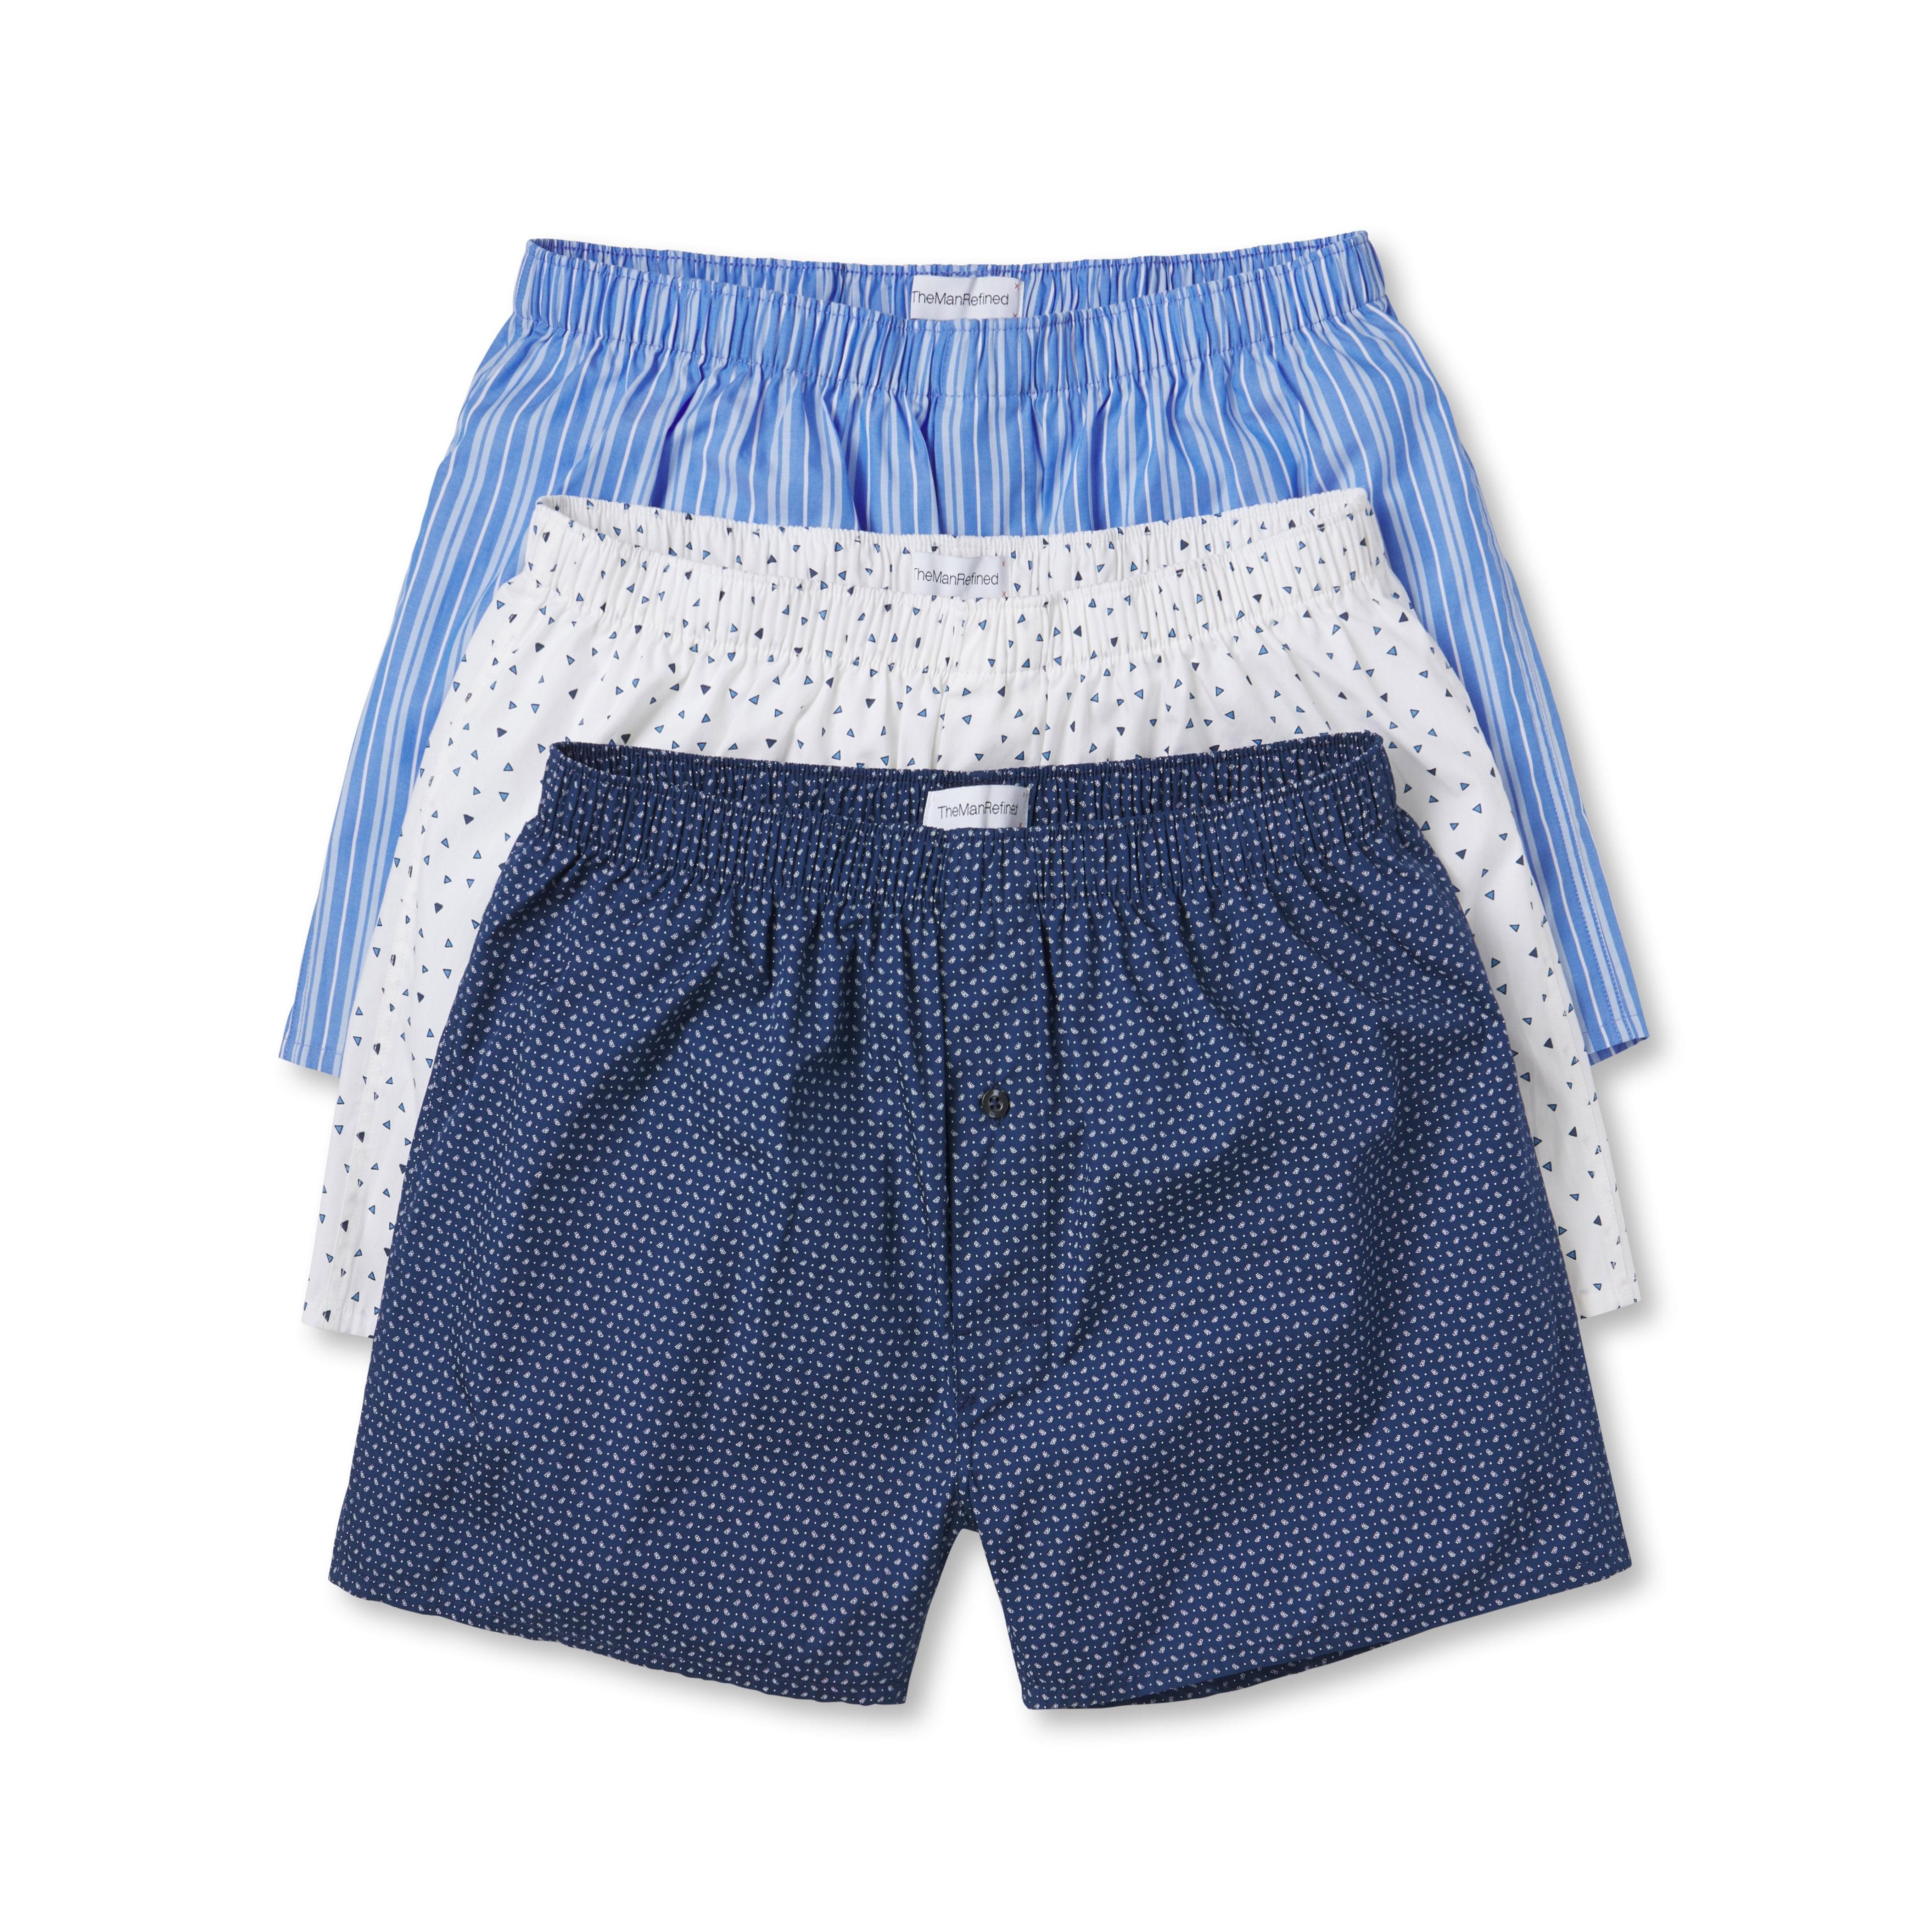 3-Pack 24/7 Woven Boxers Blues Combo